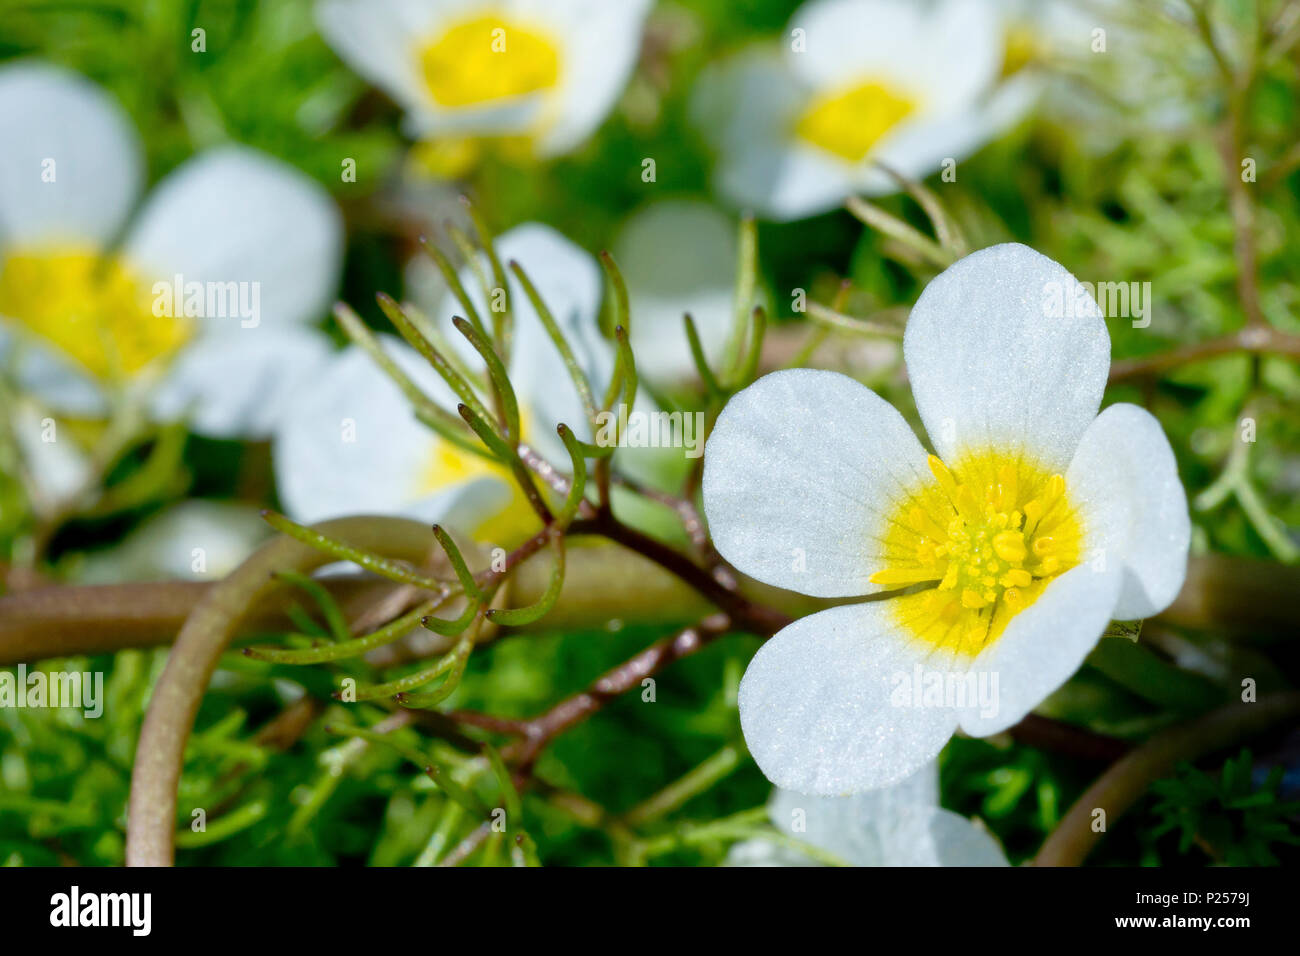 Water-crowfoot (ranunculus aquatilis), close up of a single flower amongst many showing detail. Stock Photo